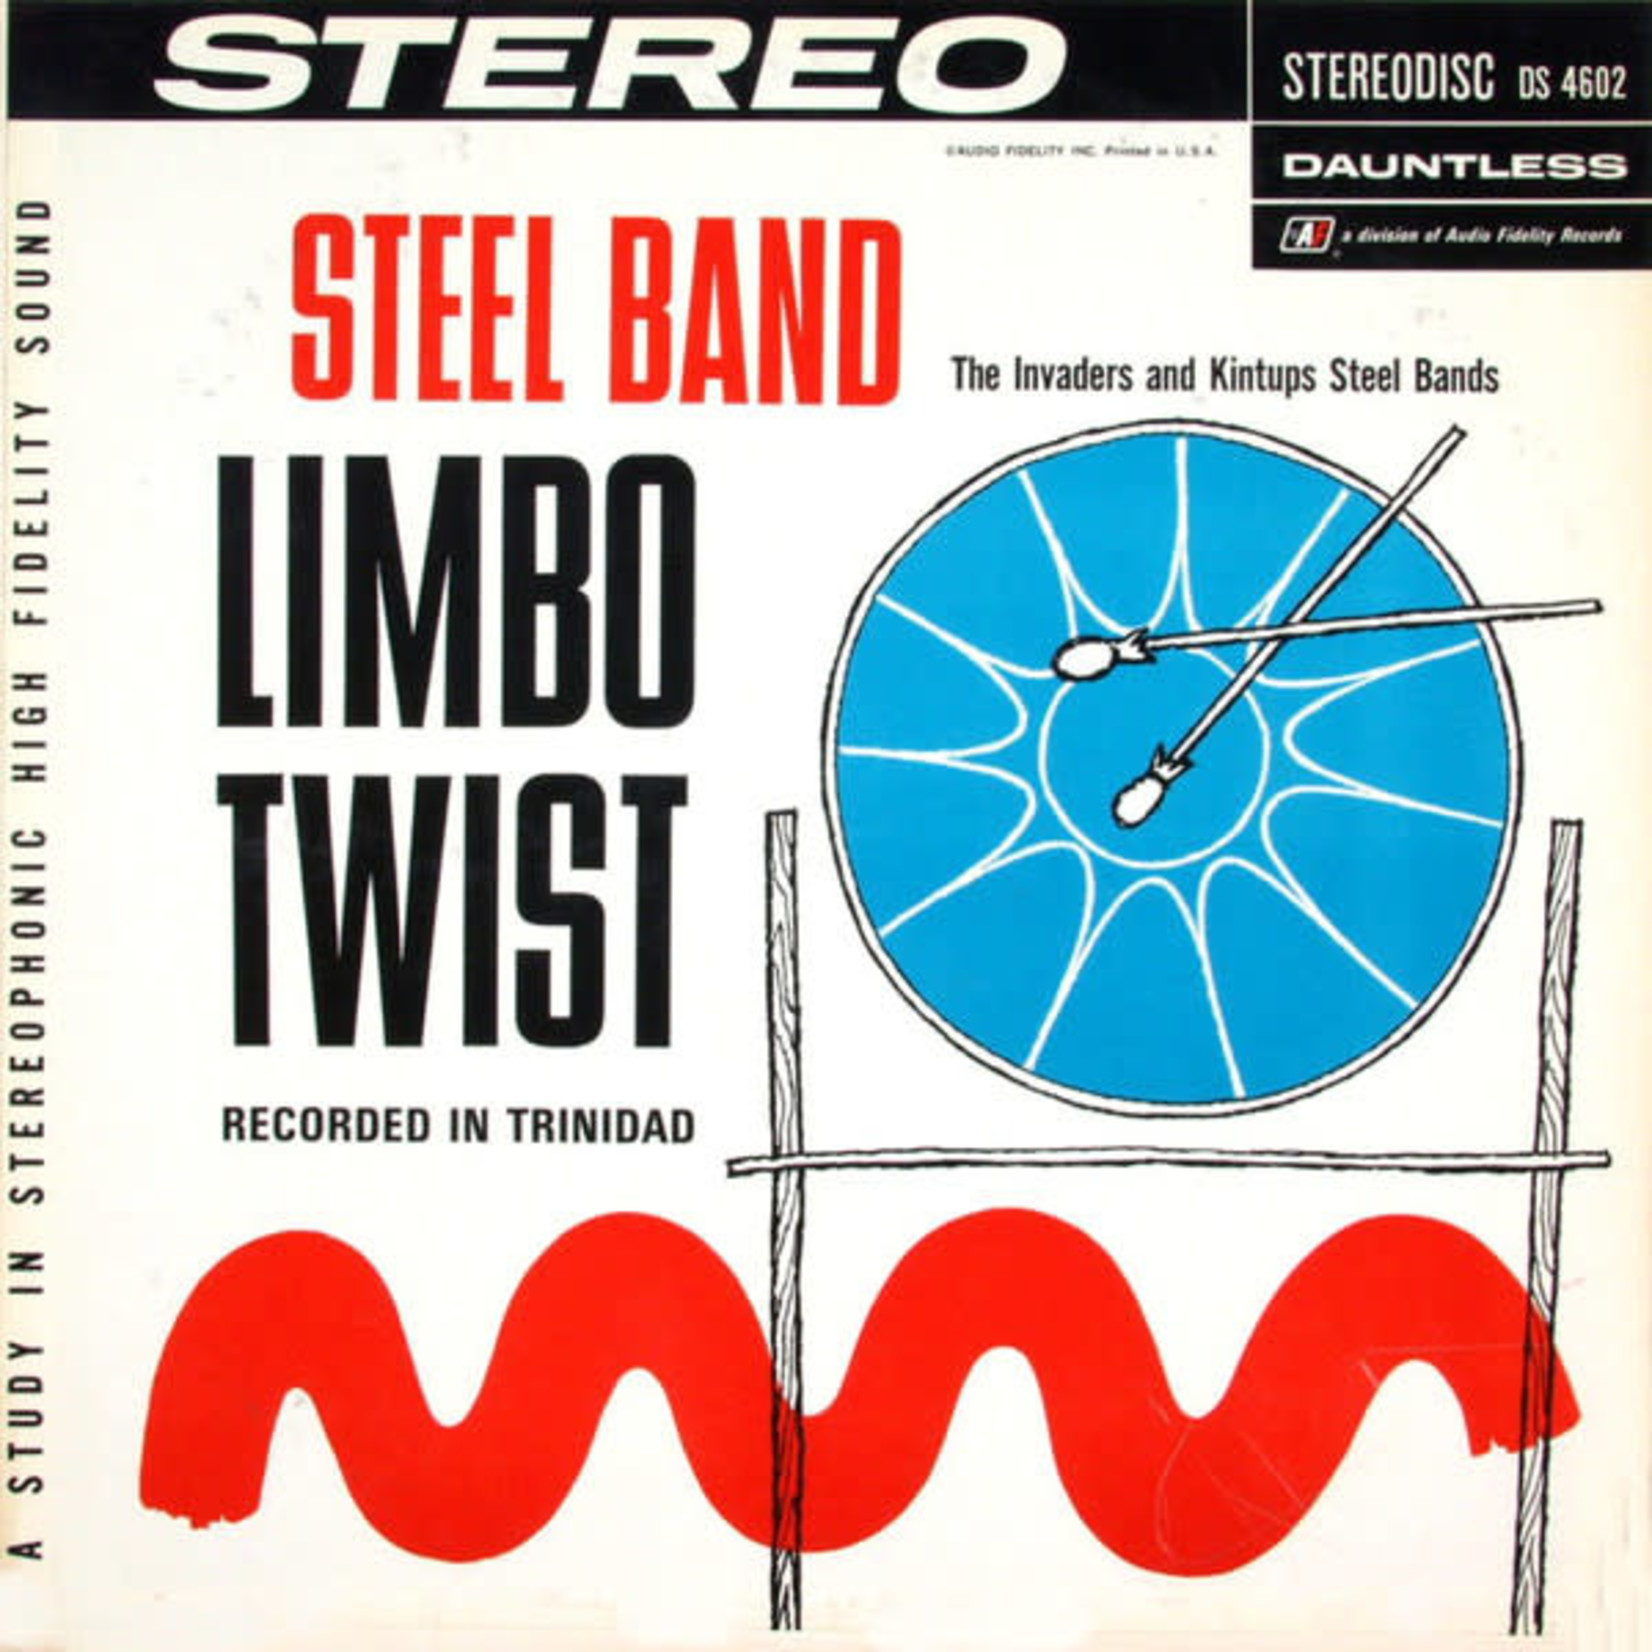 The Invaders And Kintups Steel Bands The Invaders And Kintups Steel Bands – Steel Band Limbo Twist (VG)